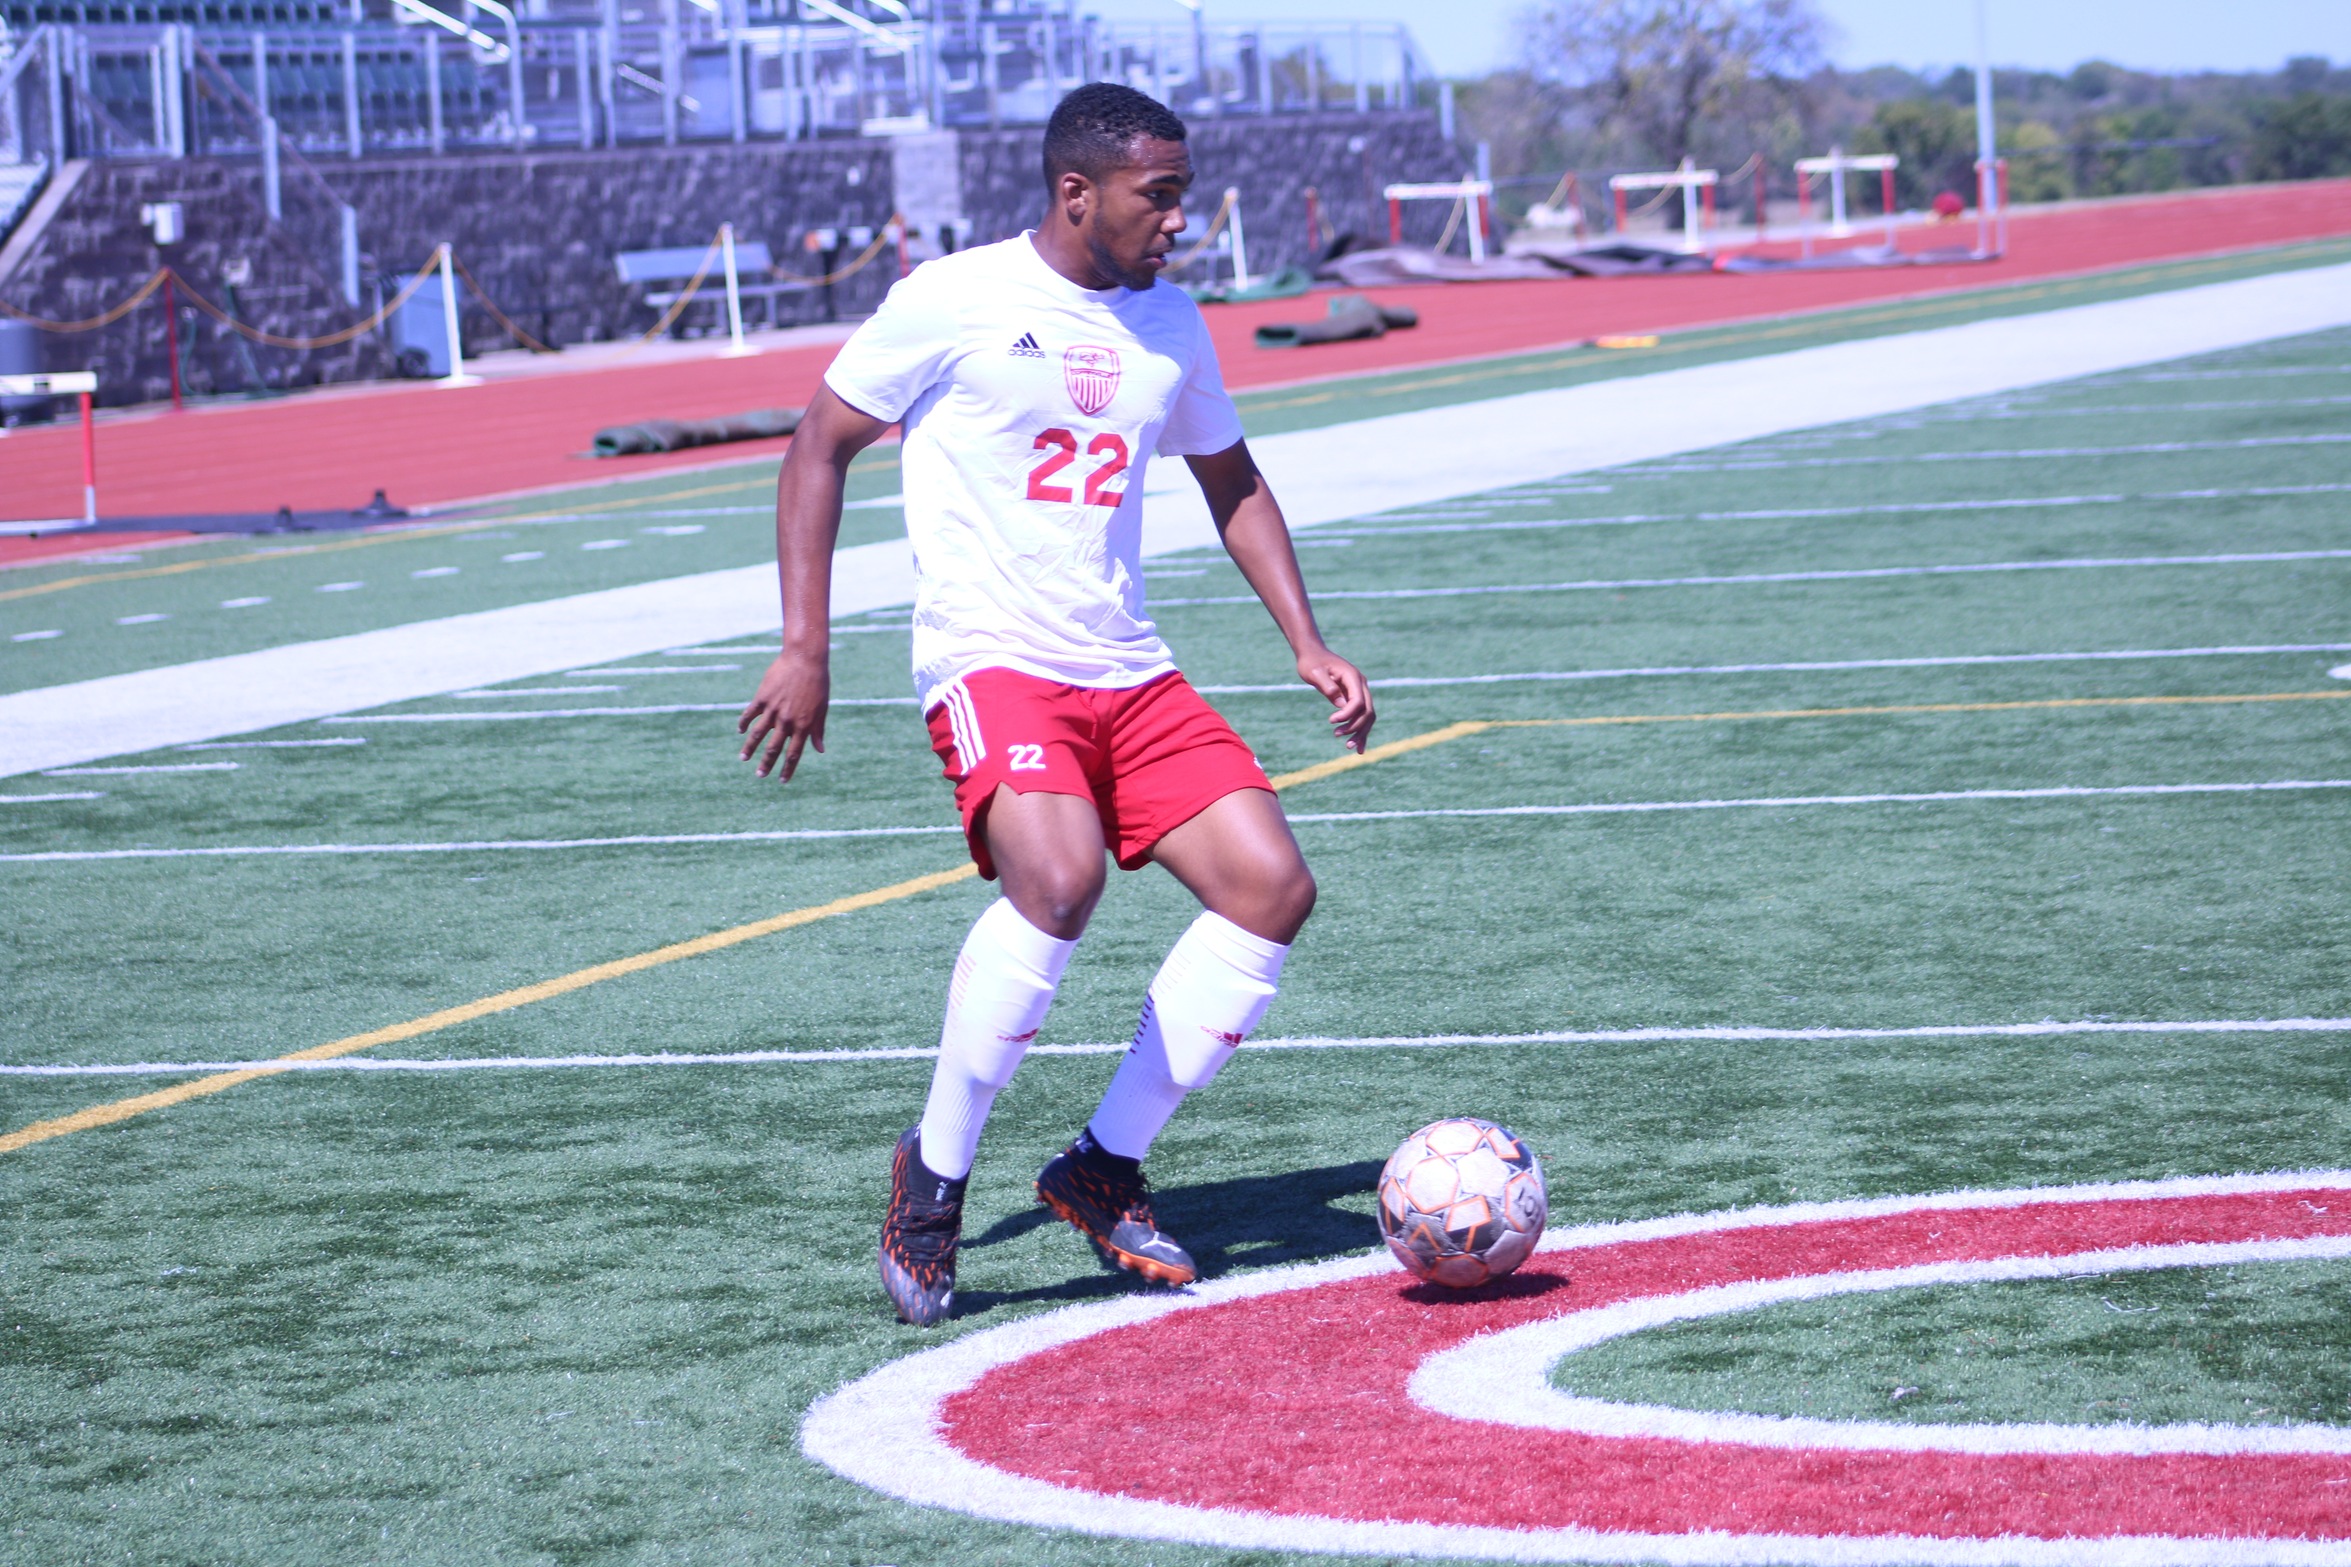 Red Raven Men's Soccer Travel to KCK and Earn 2-0 Victory to End Regular Season As KJCCC East Champions